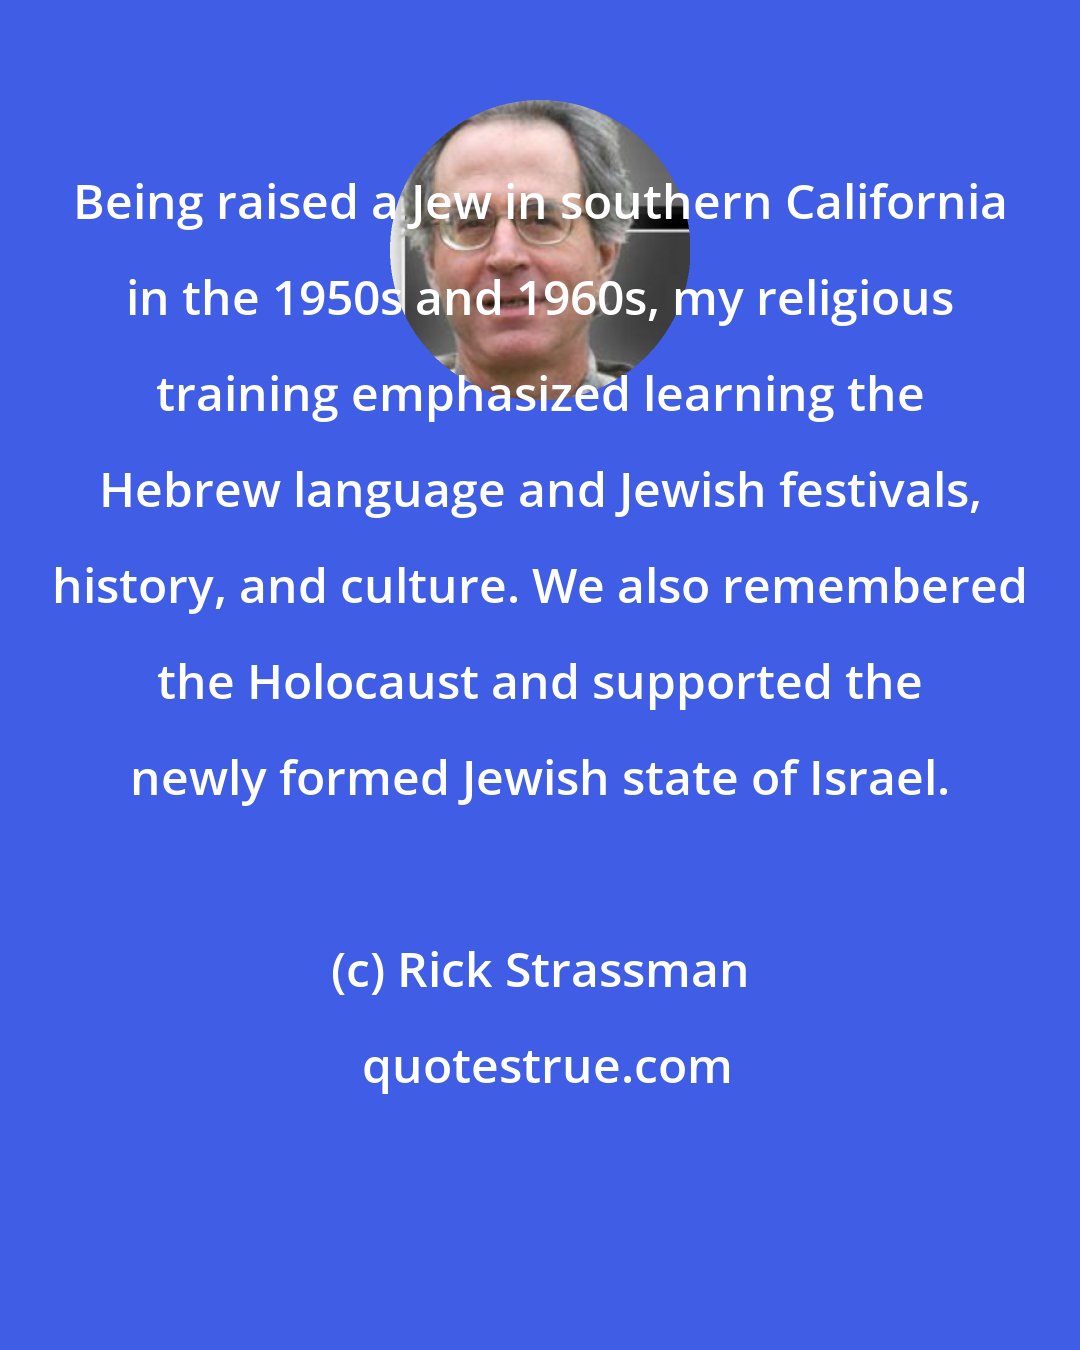 Rick Strassman: Being raised a Jew in southern California in the 1950s and 1960s, my religious training emphasized learning the Hebrew language and Jewish festivals, history, and culture. We also remembered the Holocaust and supported the newly formed Jewish state of Israel.